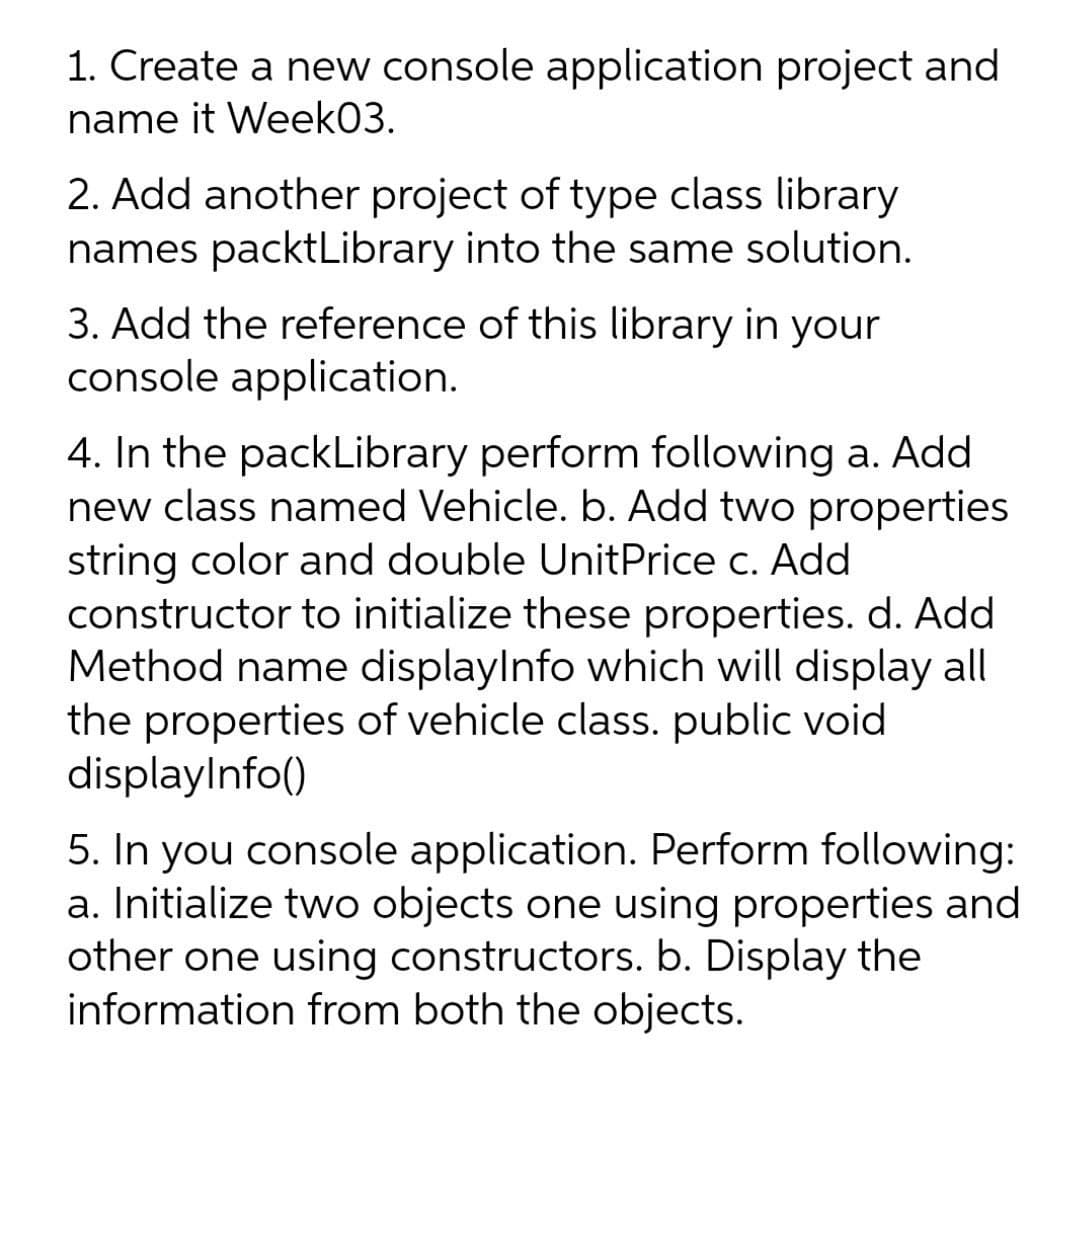 1. Create a new console application project and
name it Week03.
2. Add another project of type class library
names packtLibrary into the same solution.
3. Add the reference of this library in your
console application.
4. In the packLibrary perform following a. Add
new class named Vehicle. b. Add two properties
string color and double UnitPrice c. Add
constructor to initialize these properties. d. Add
Method name displaylnfo which will display all
the properties of vehicle class. public void
displaylnfo()
5. In you console application. Perform following:
a. Initialize two objects one using properties and
other one using constructors. b. Display the
information from both the objects.
